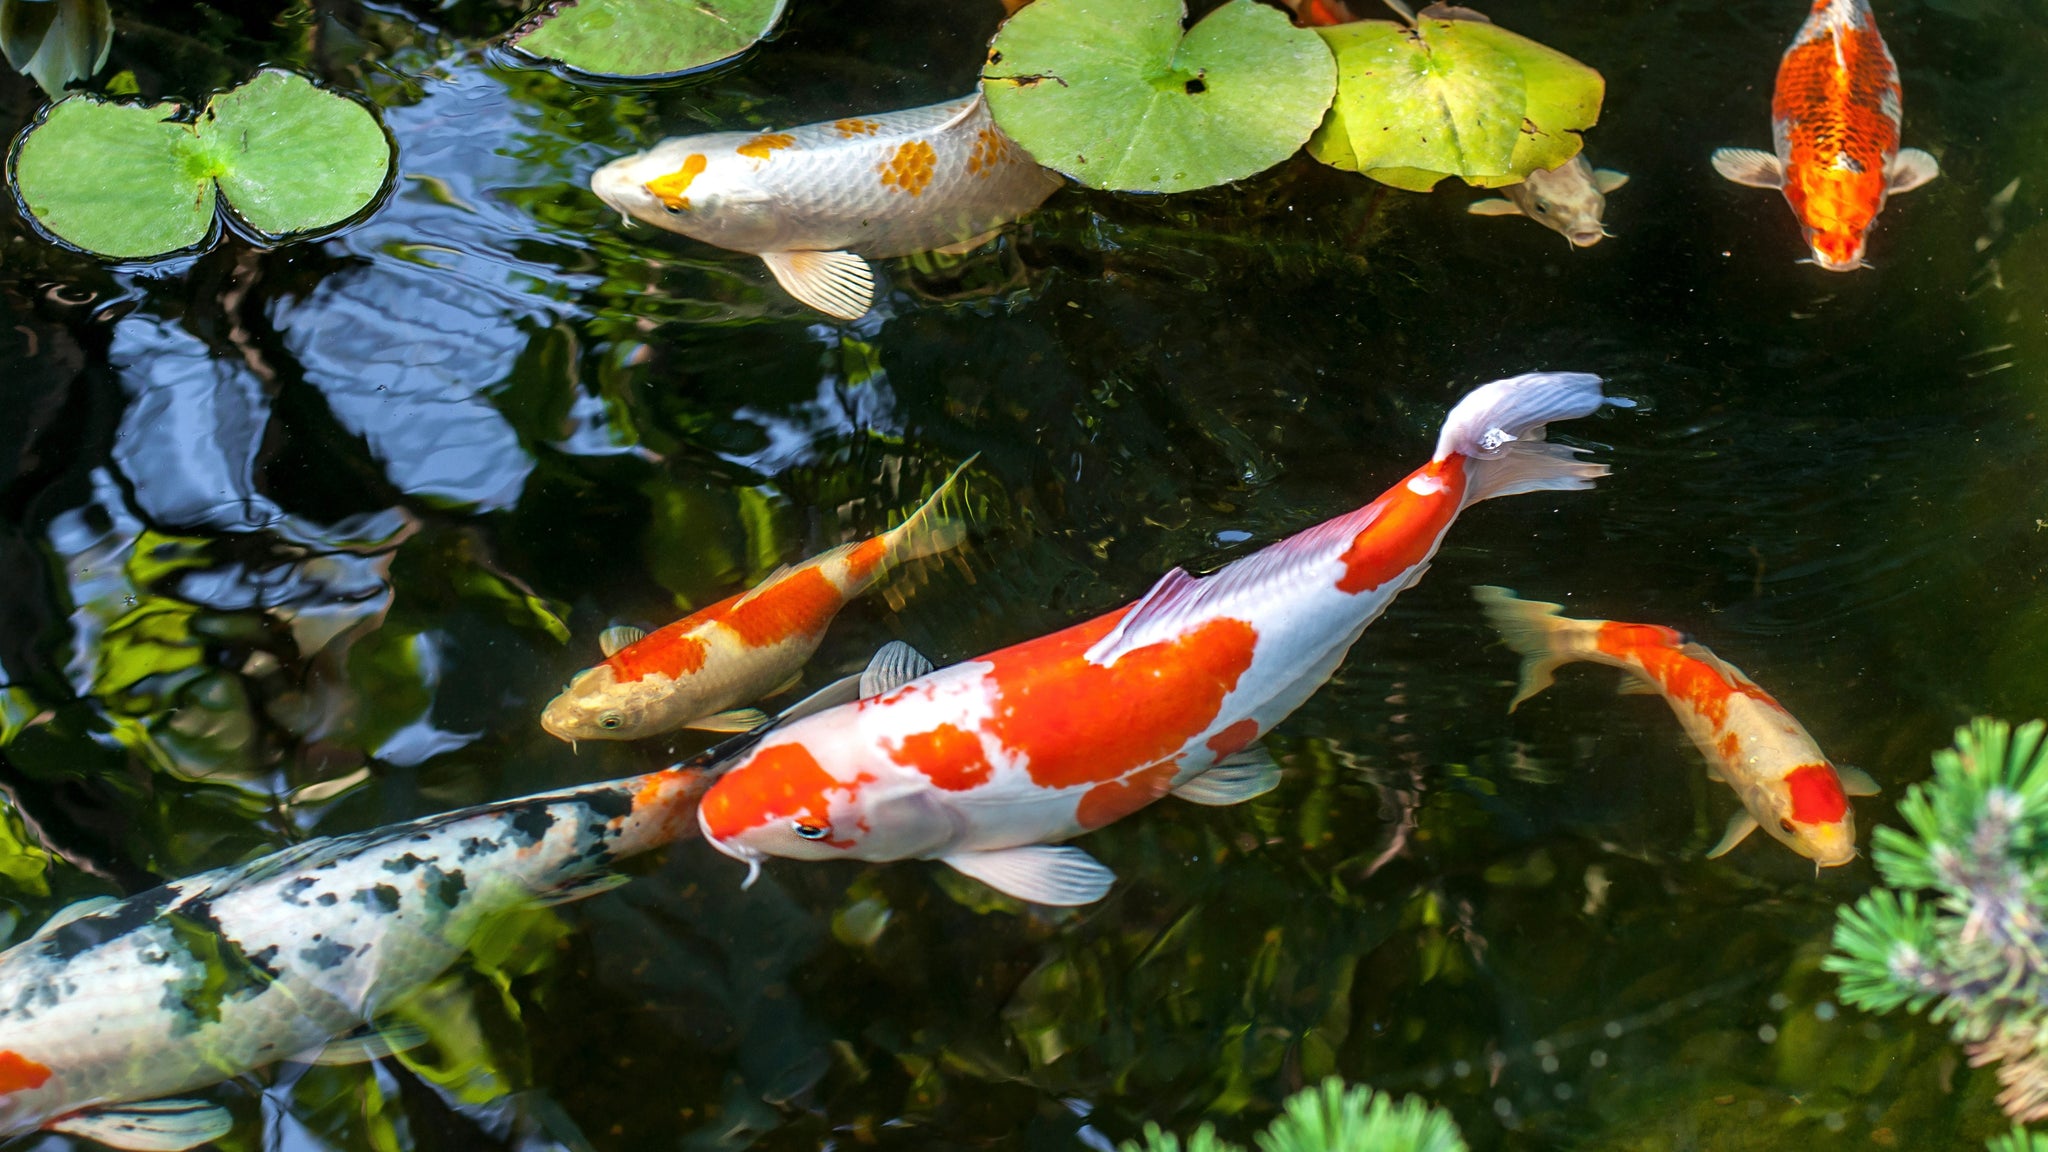 How to Master Koi Fish Care: Housing, Maintenance, and Problem Solving